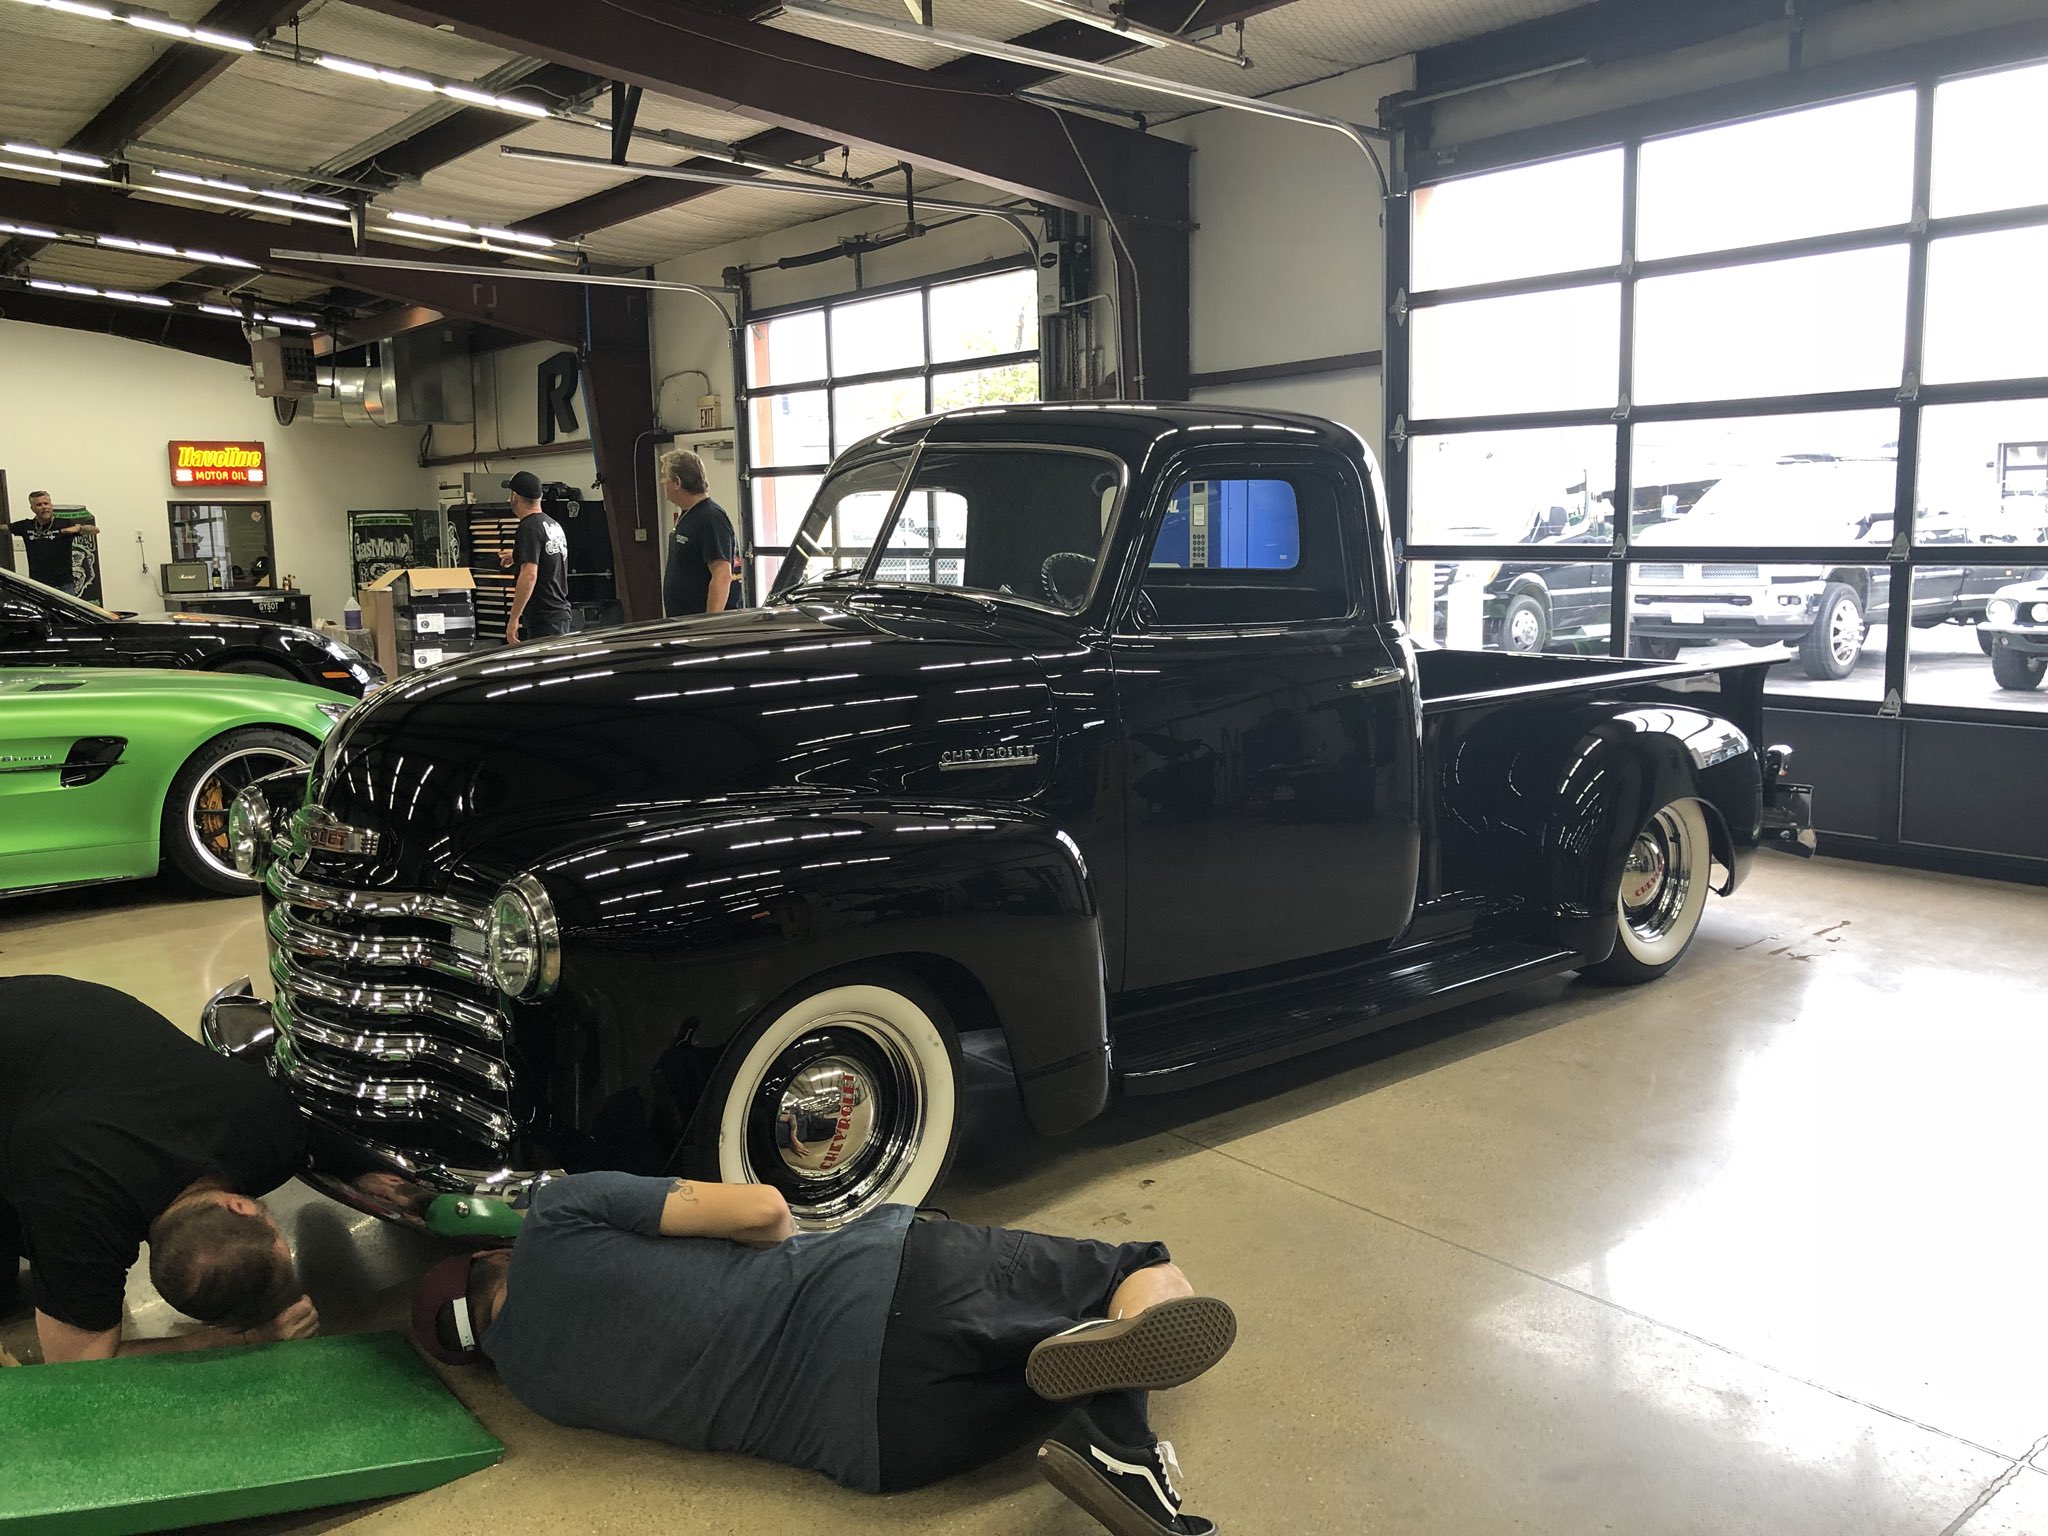 Gas Monkey Garage on Twitter: "The owner of the '49 Chevy ...